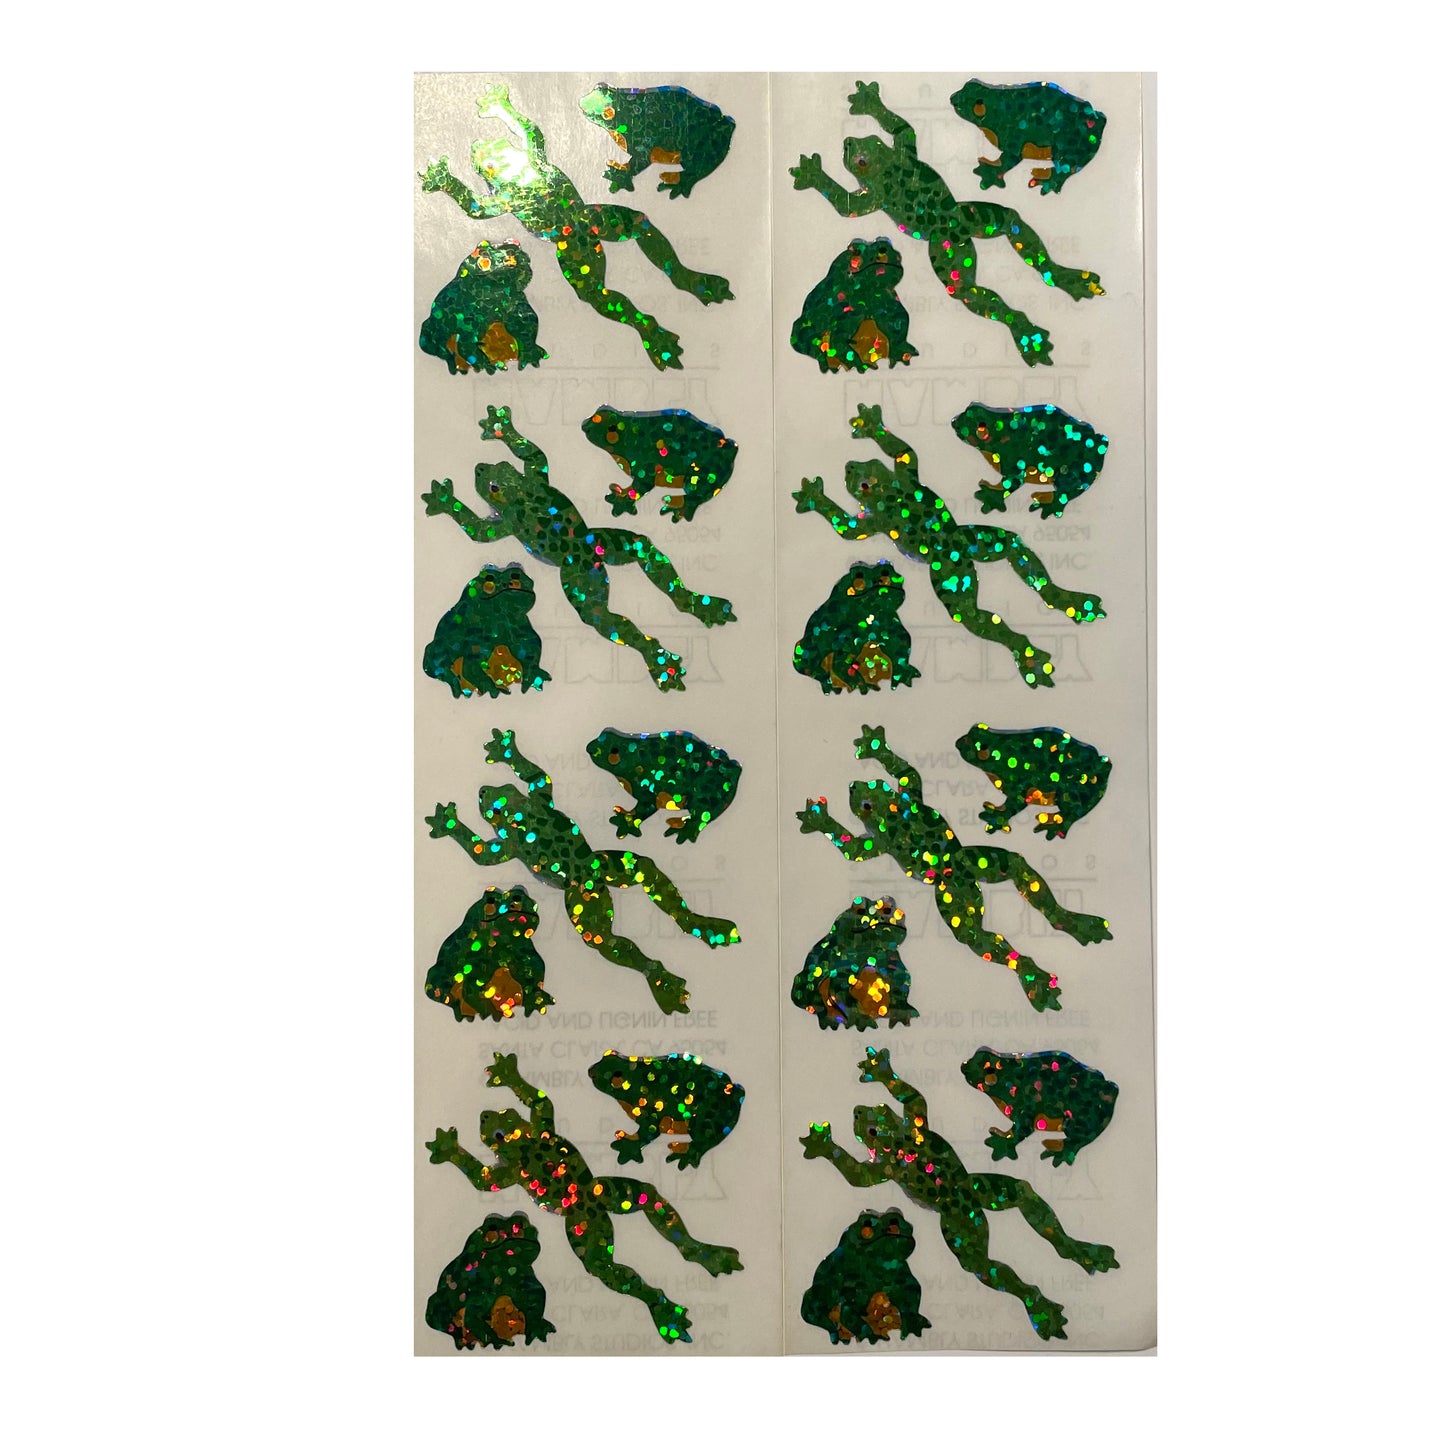 HAMBLY: Jumping Frog glitter stickers